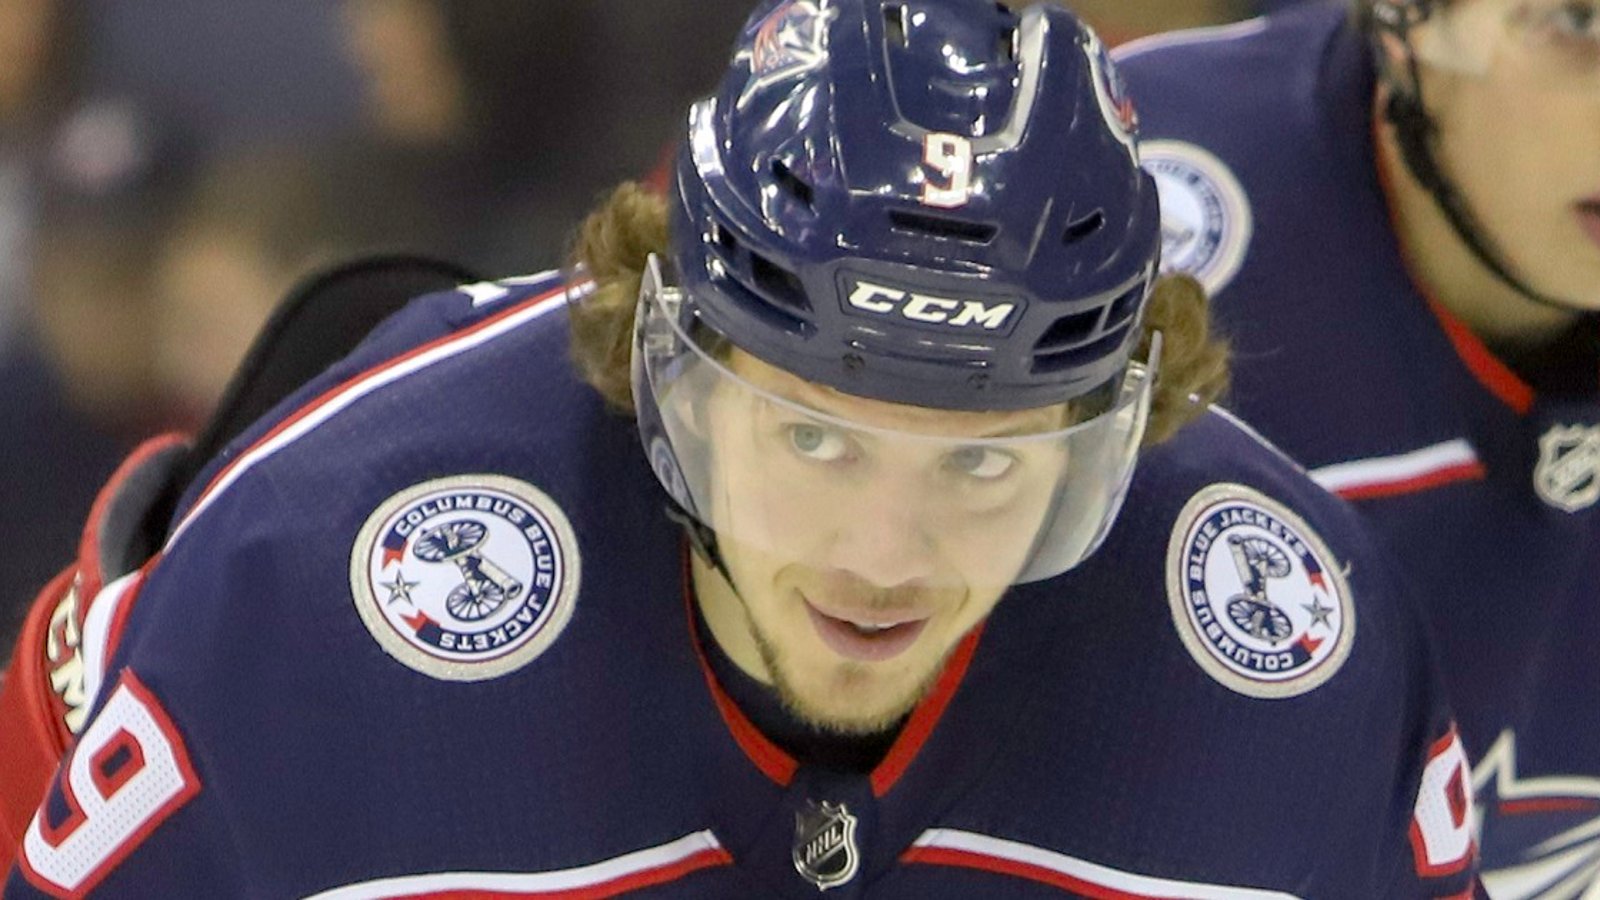 Breaking: The Blue Jackets have made Panarin a shocking last minute offer.